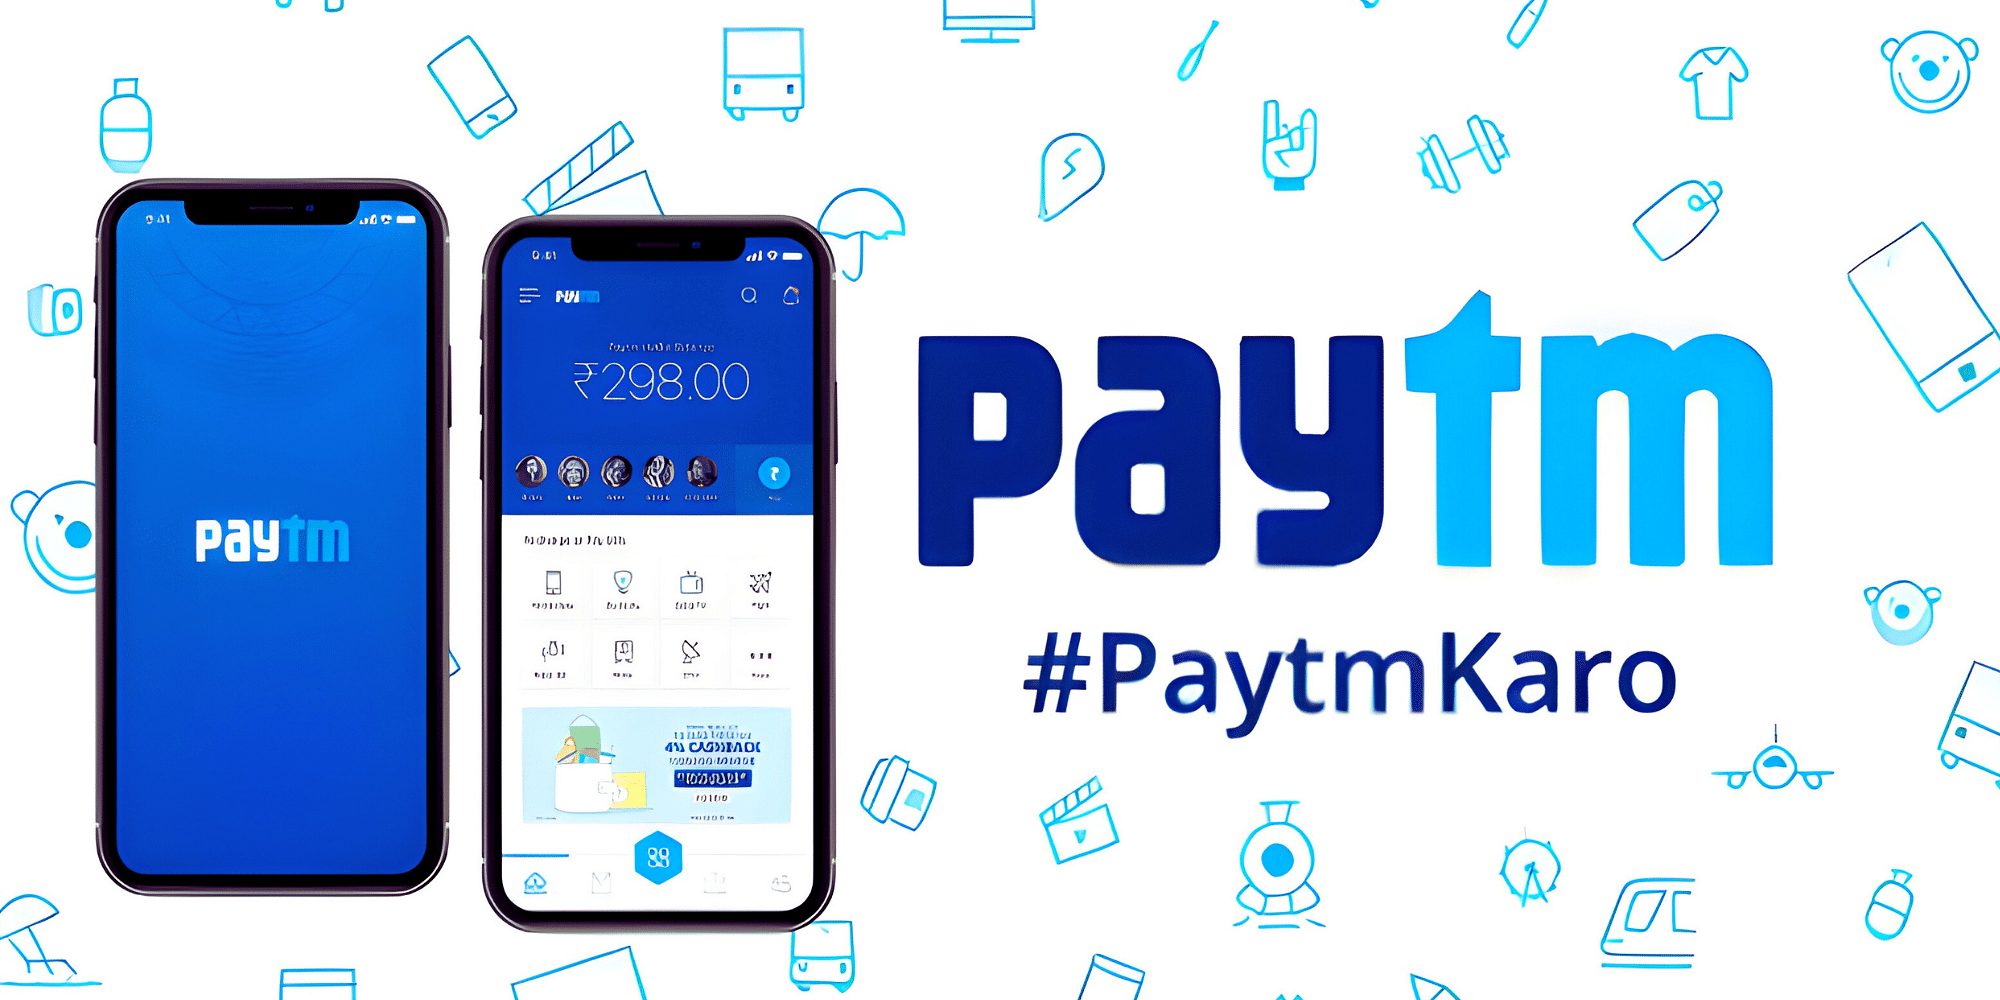 You are currently viewing Empowering Arunachal Pradesh: Paytm’s Startup Ecosystem Partnership